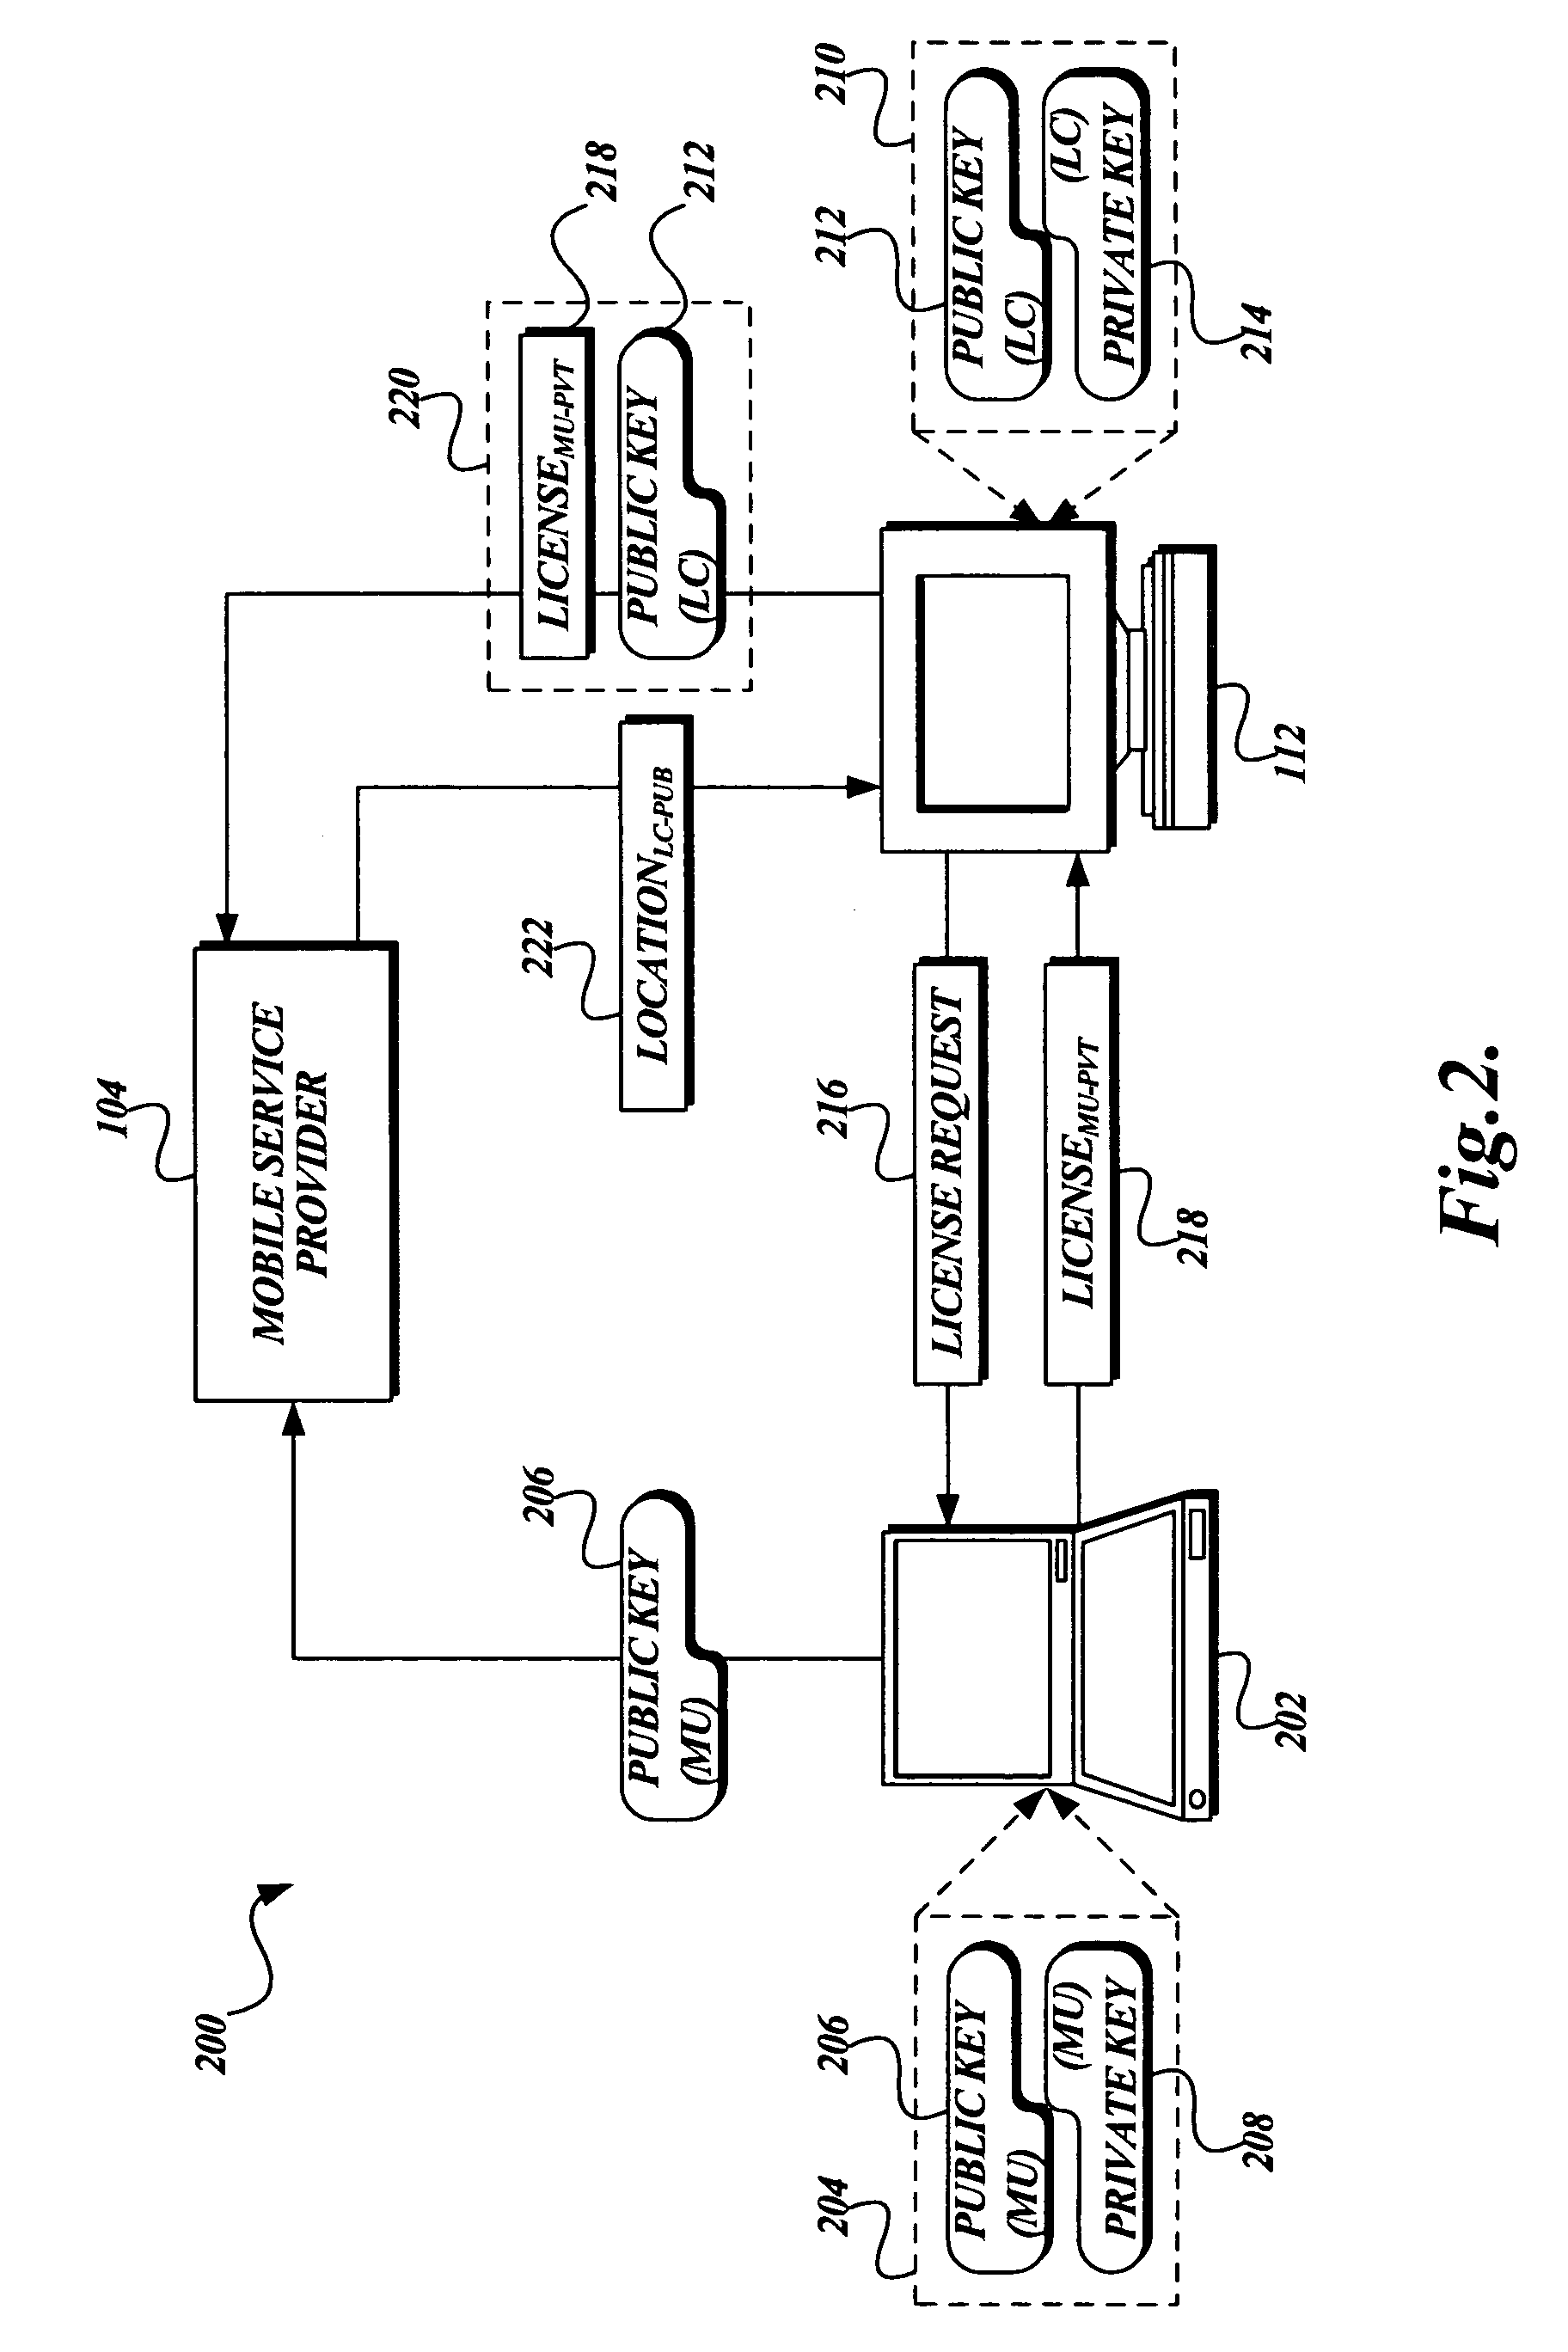 System and method for enforcing location privacy using rights management